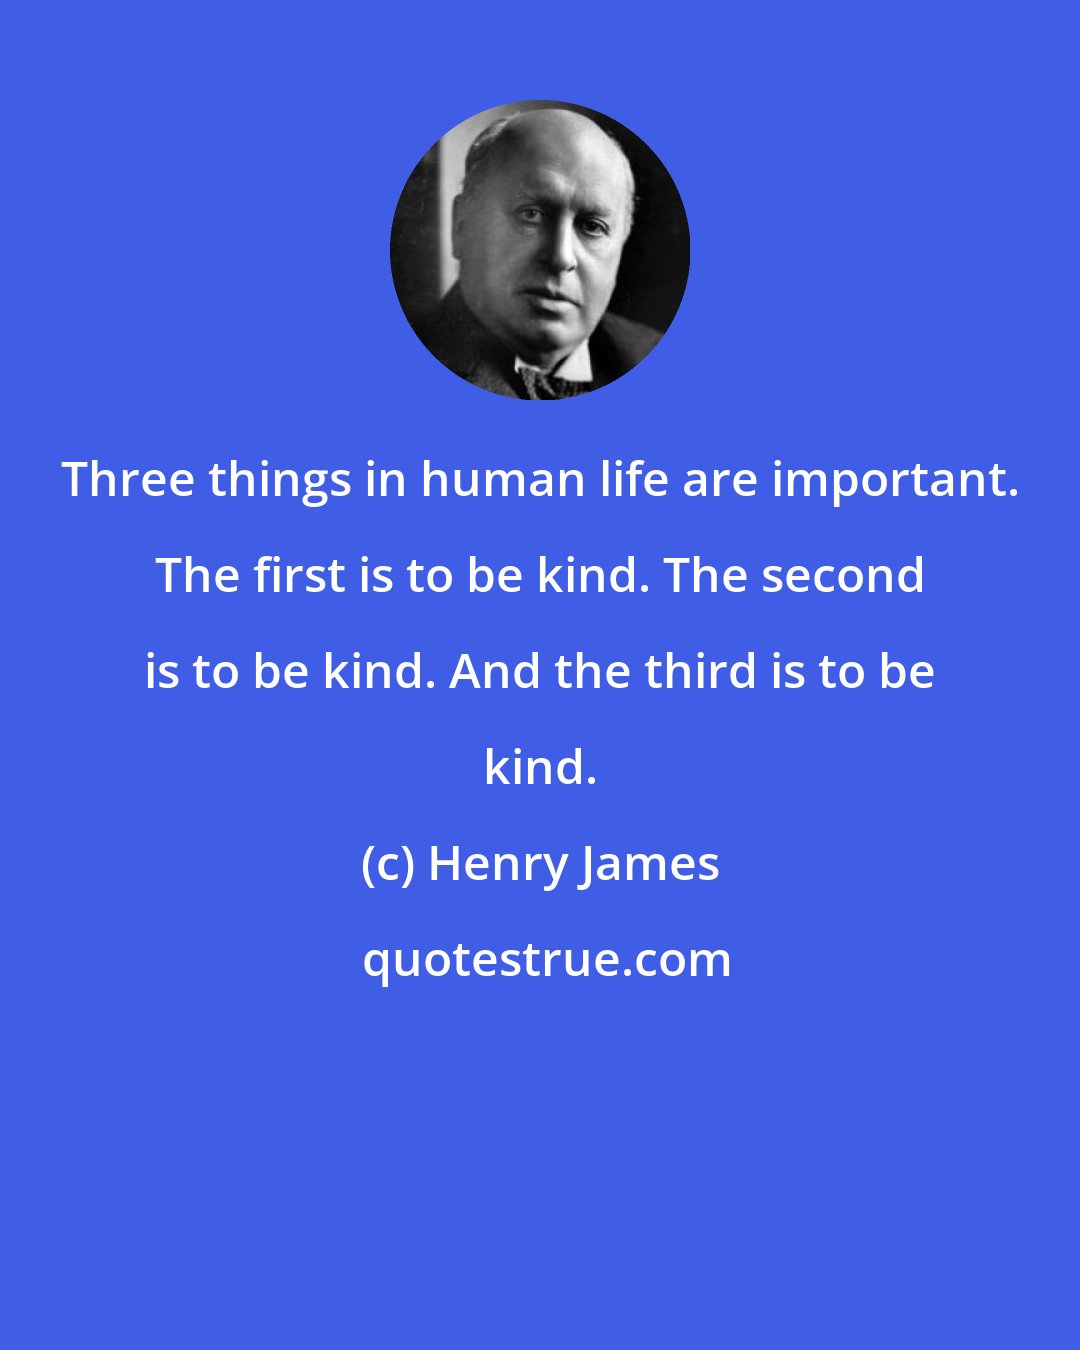 Henry James: Three things in human life are important. The first is to be kind. The second is to be kind. And the third is to be kind.